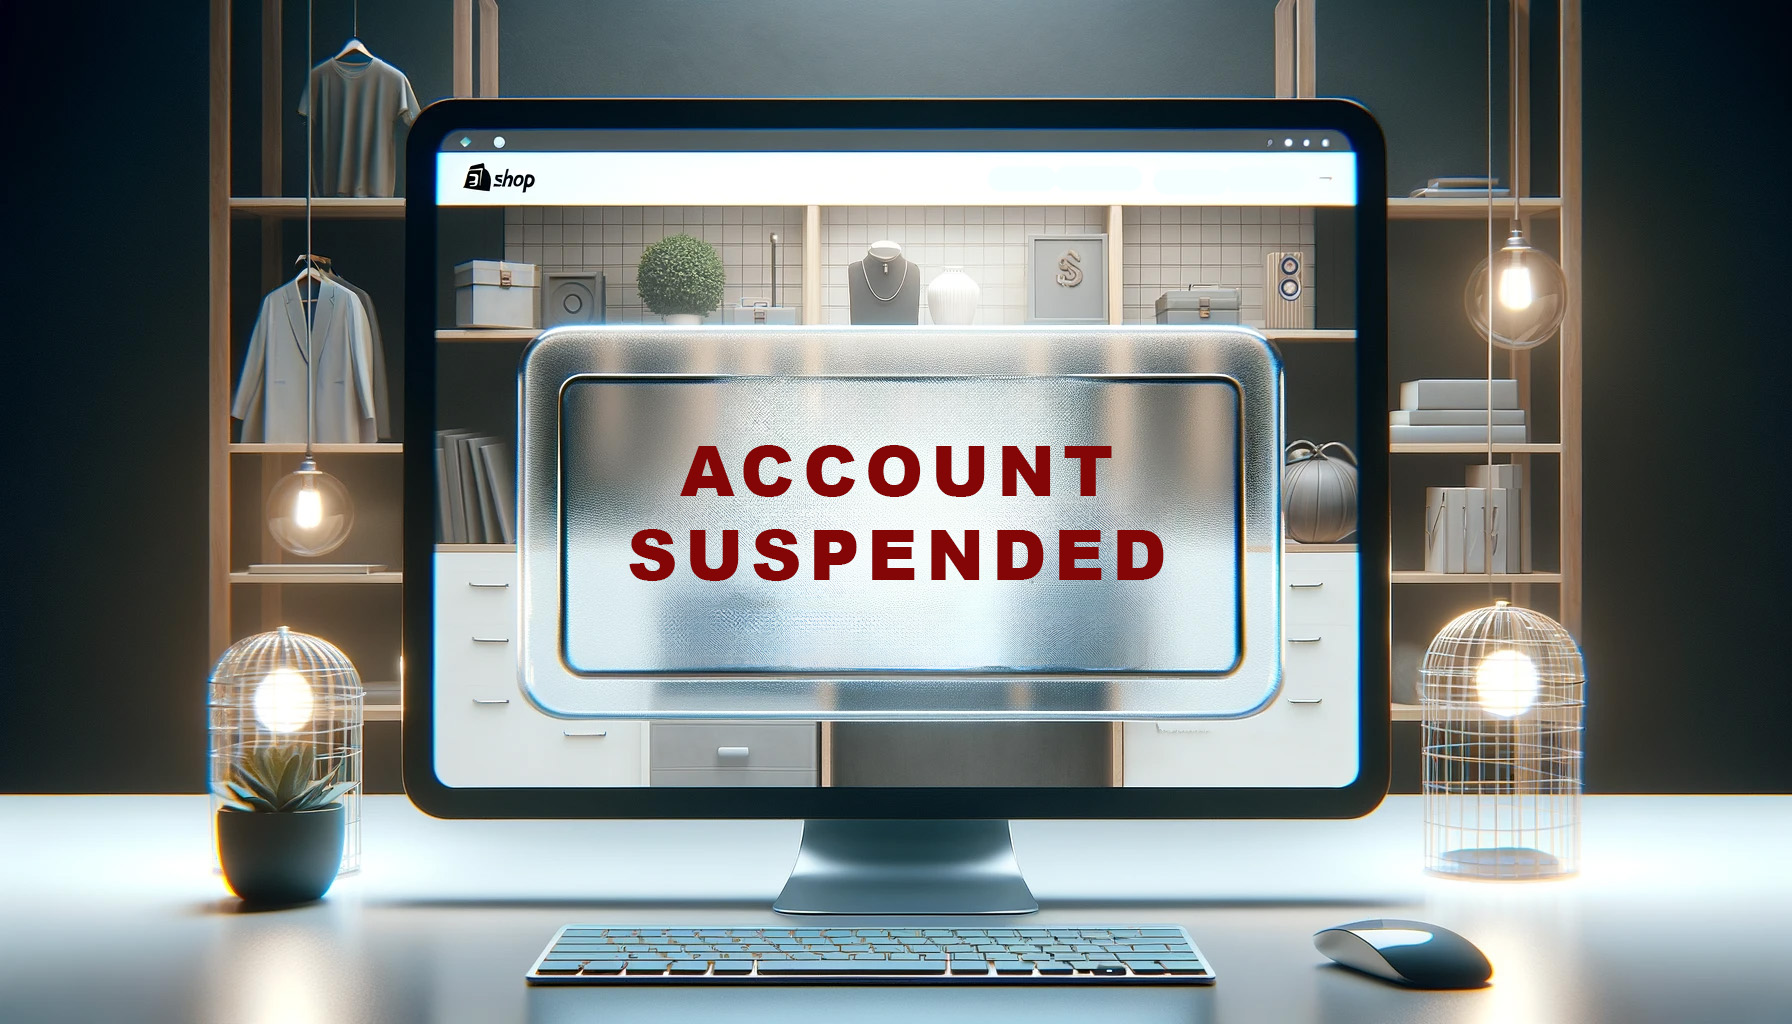 "account suspended" on top of a shopify ecommerce store surrounded by lights and hanging clothes